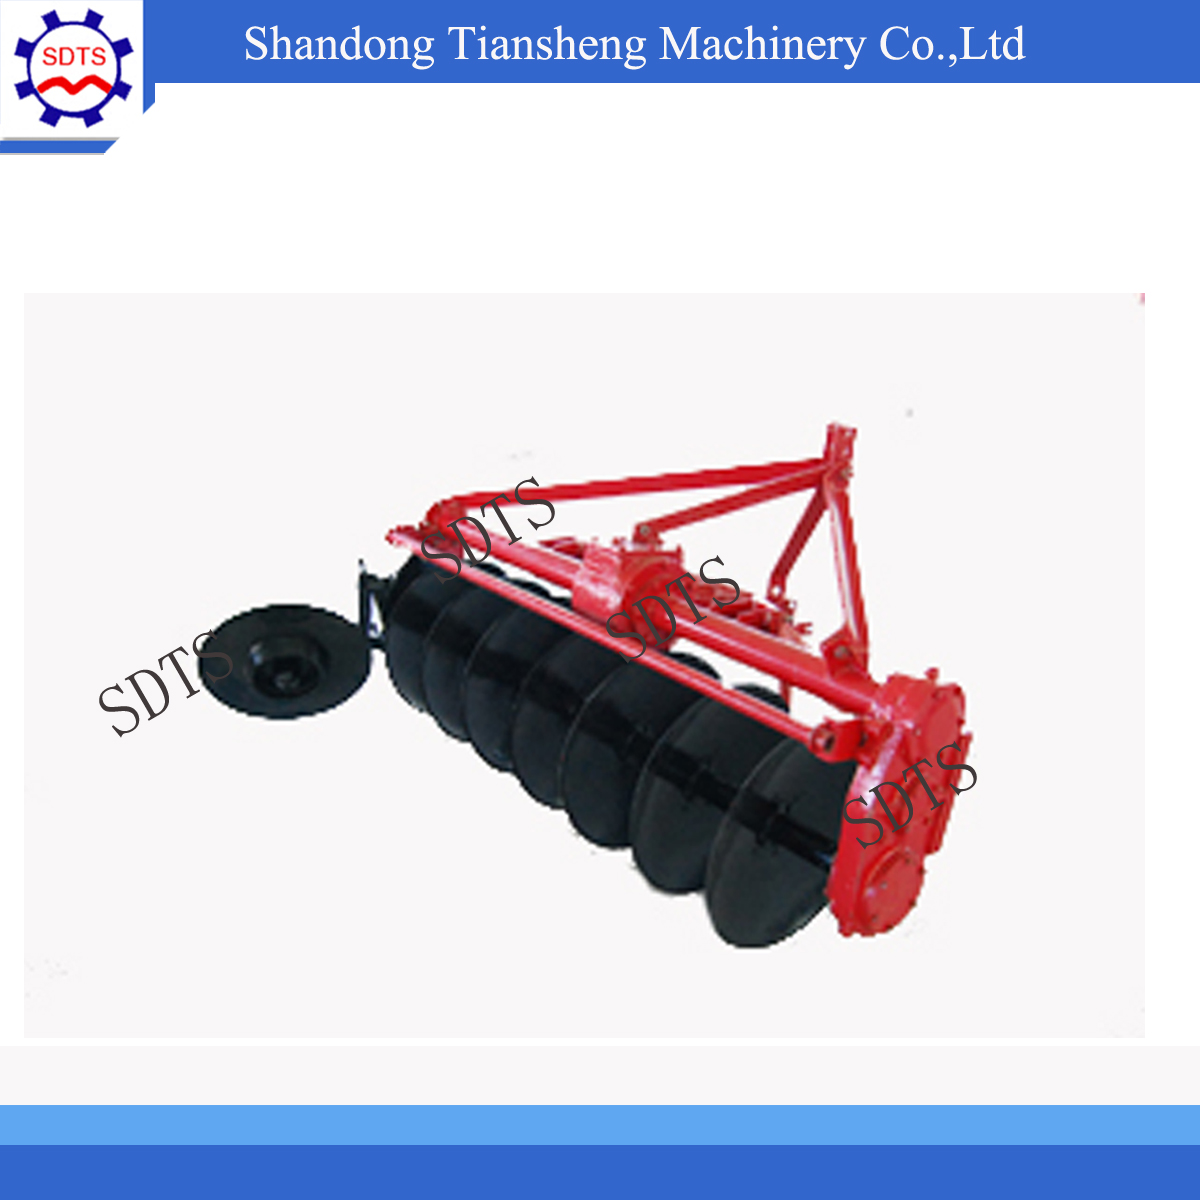 1LYQ-722 Farming rotary-driven Driven disc plow /plough made in China